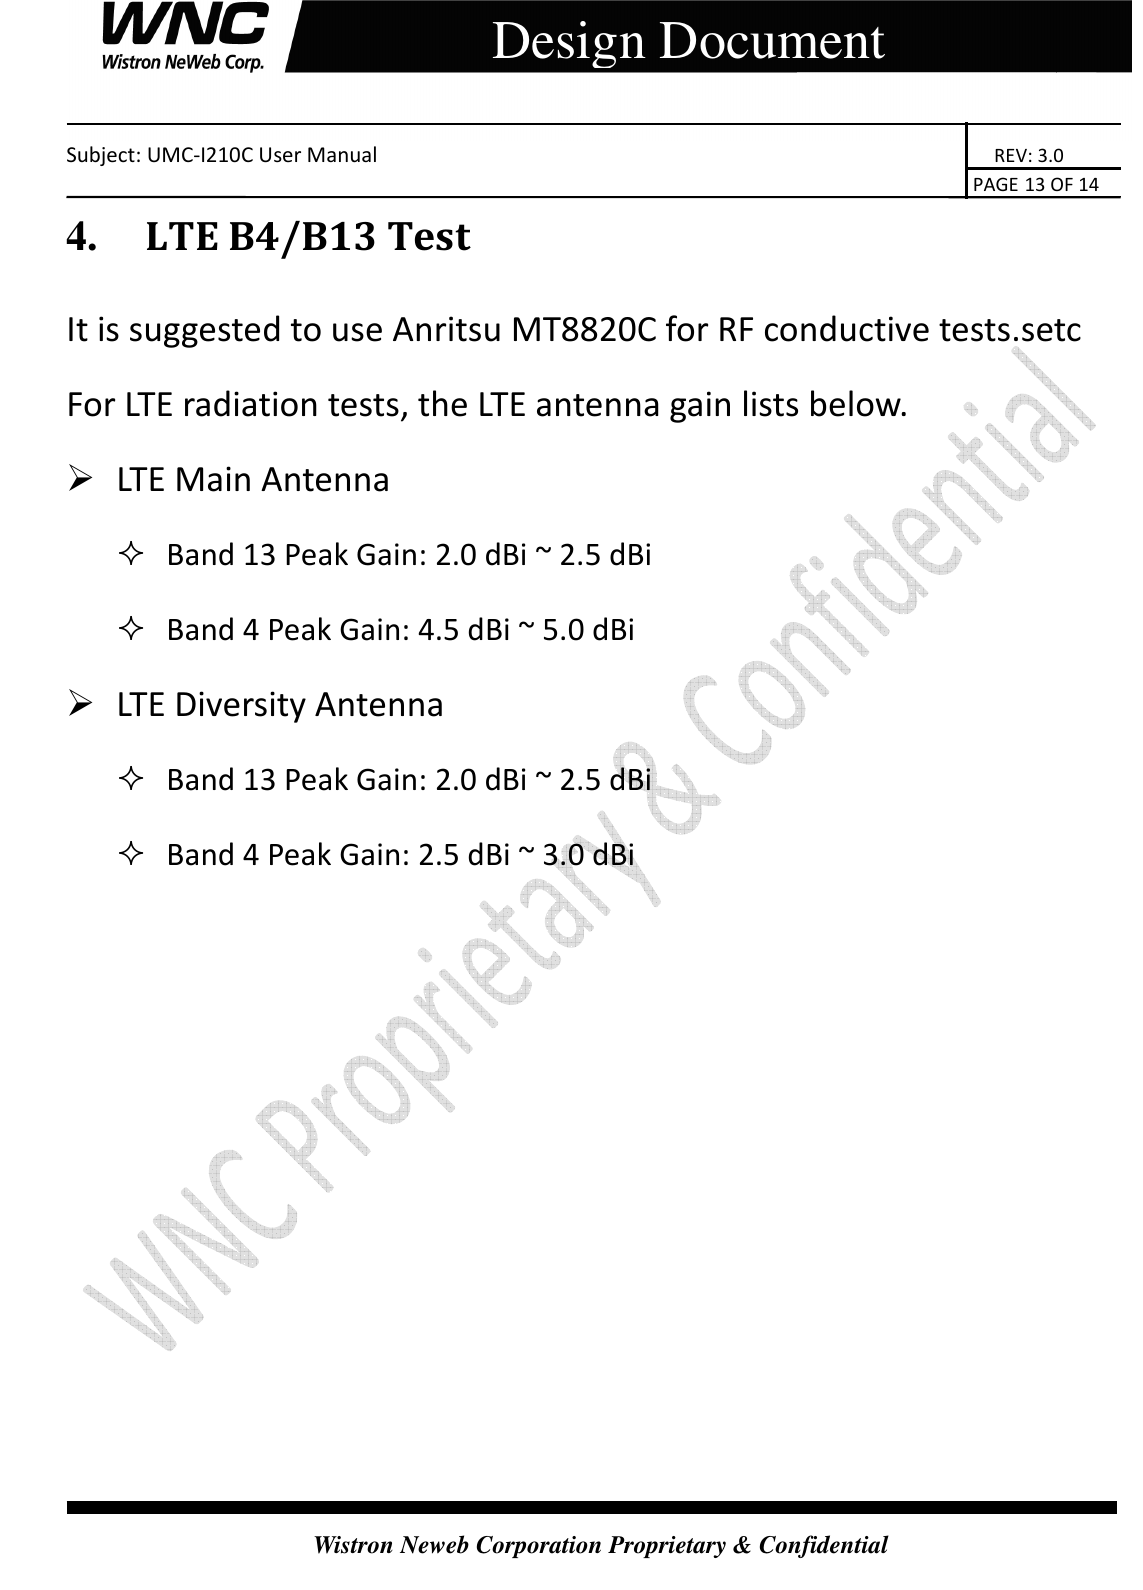    Subject: UMC-I210C User Manual                                                                       REV: 3.0                                                                                                                                                                               PAGE 13 OF 14  Wistron Neweb Corporation Proprietary &amp; Confidential     Design Document 4.     LTE B4/B13 Test It is suggested to use Anritsu MT8820C for RF conductive tests.setc For LTE radiation tests, the LTE antenna gain lists below.  LTE Main Antenna    Band 13 Peak Gain: 2.0 dBi ~ 2.5 dBi    Band 4 Peak Gain: 4.5 dBi ~ 5.0 dBi    LTE Diversity Antenna    Band 13 Peak Gain: 2.0 dBi ~ 2.5 dBi    Band 4 Peak Gain: 2.5 dBi ~ 3.0 dBi          